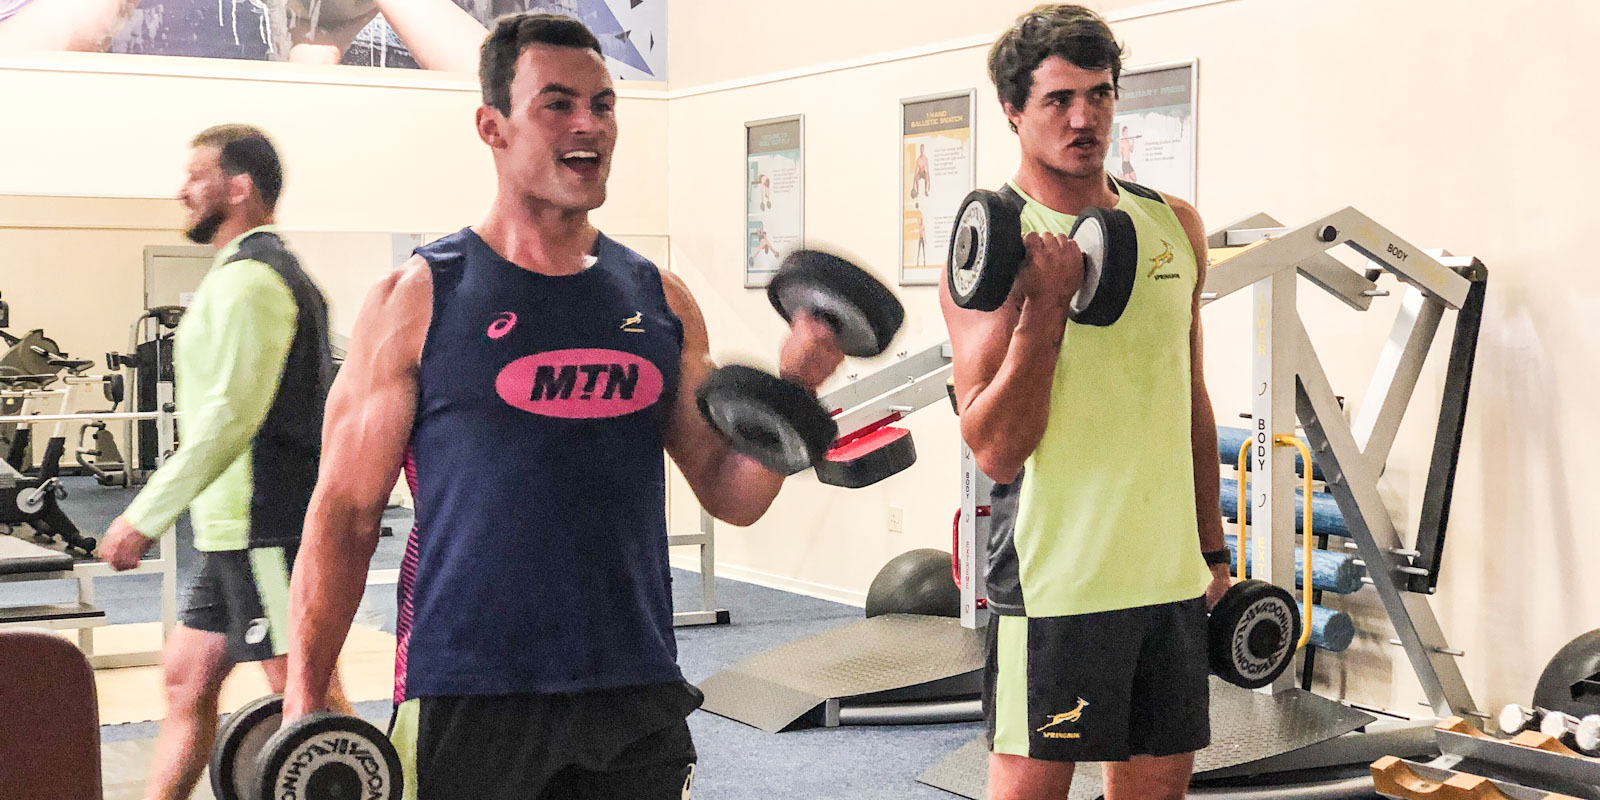 Jesse Kriel and Franco Mostert sweat it out in the gym at the Springbok training camp in Bloemfontein.